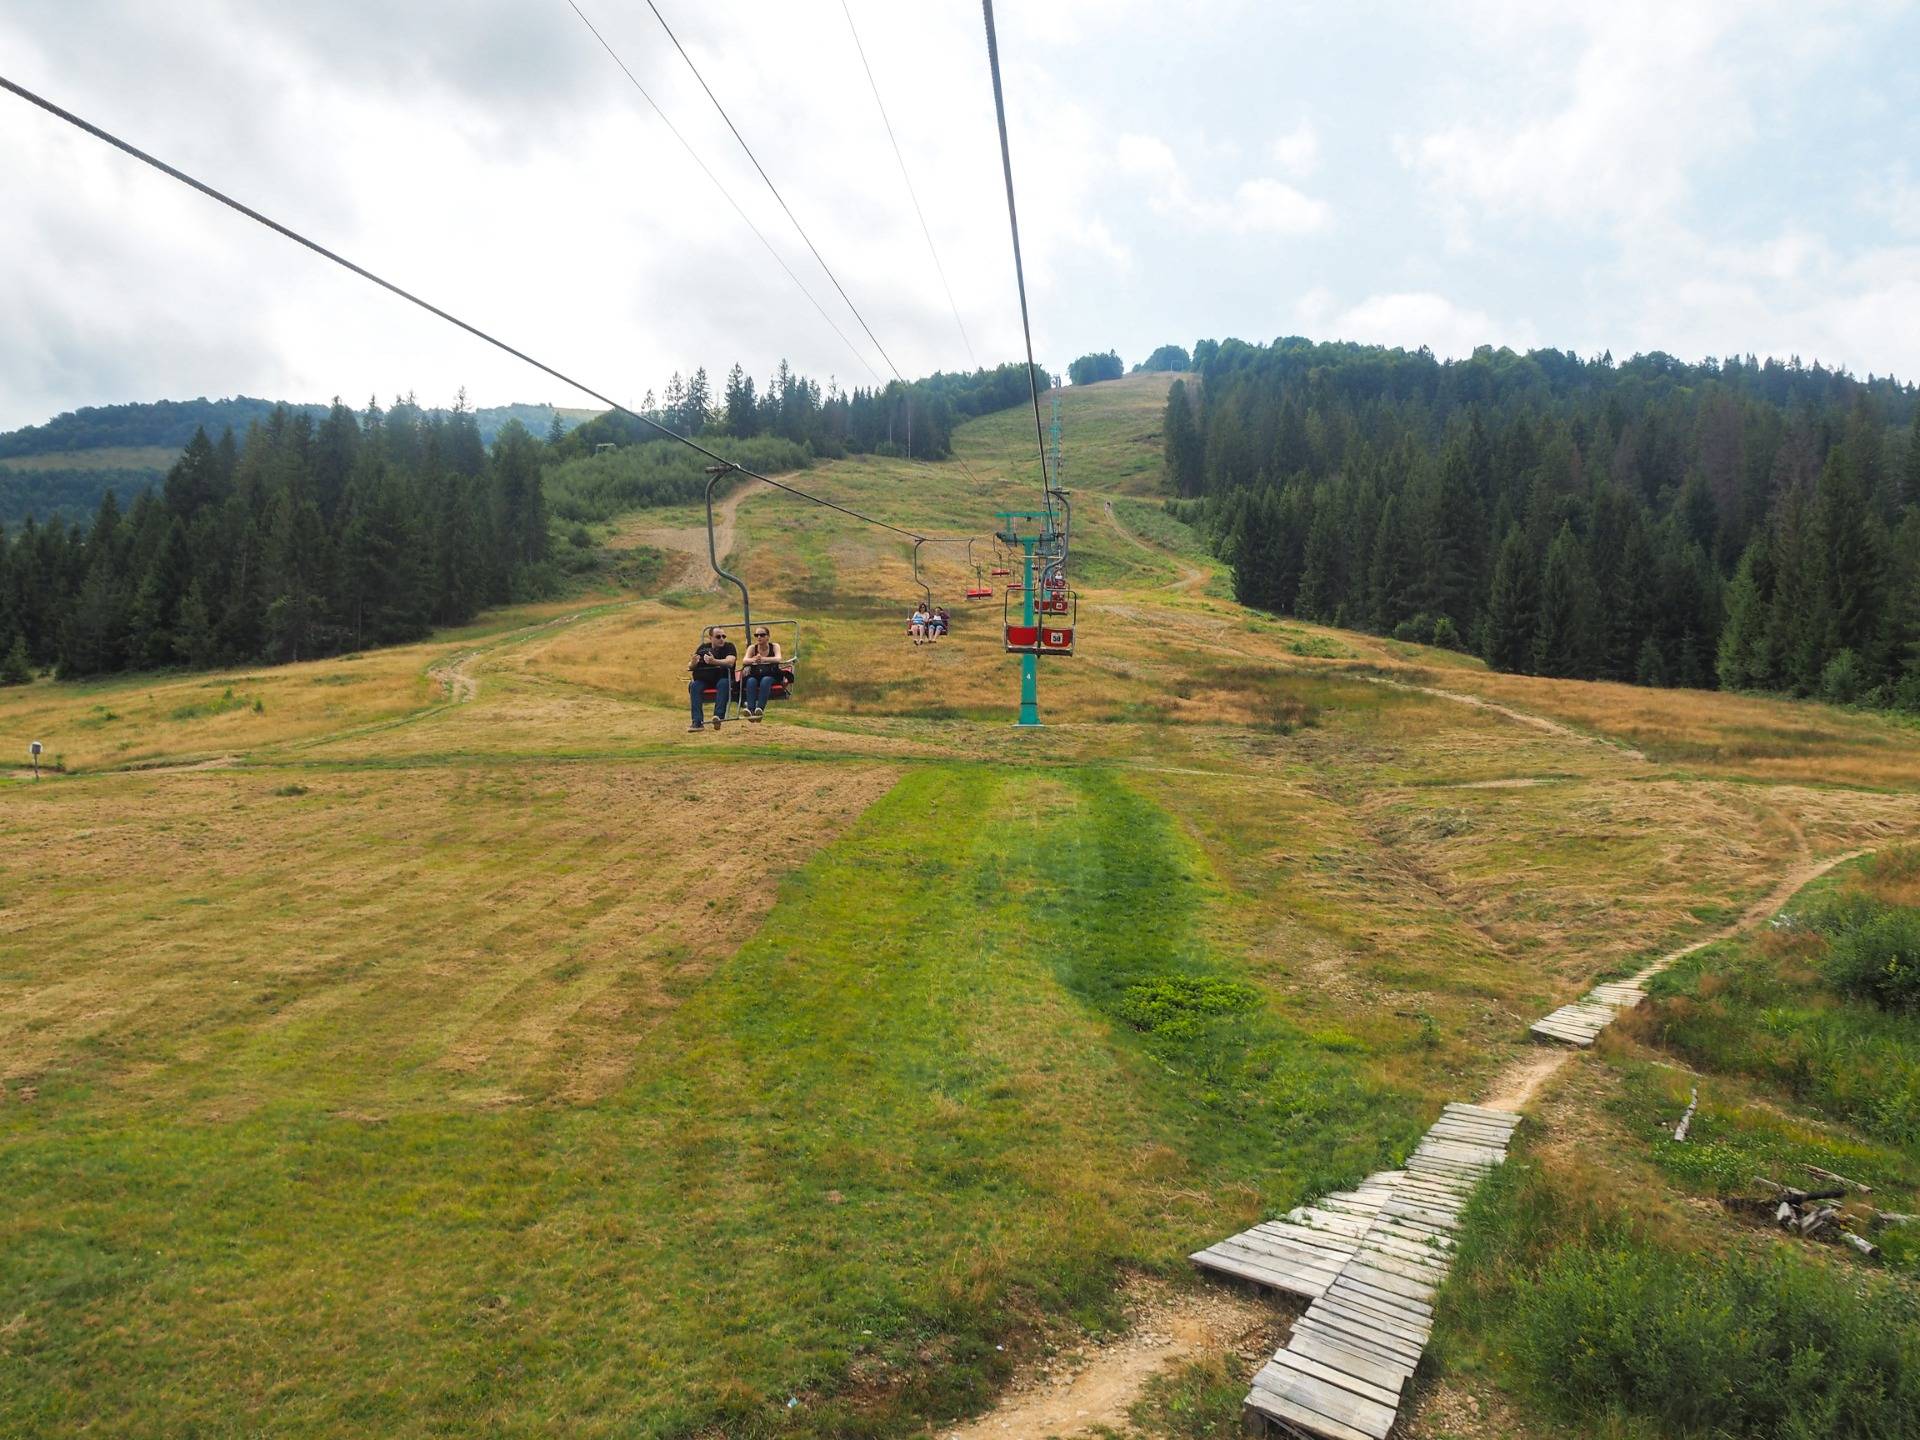 The ski slope is empty in summer